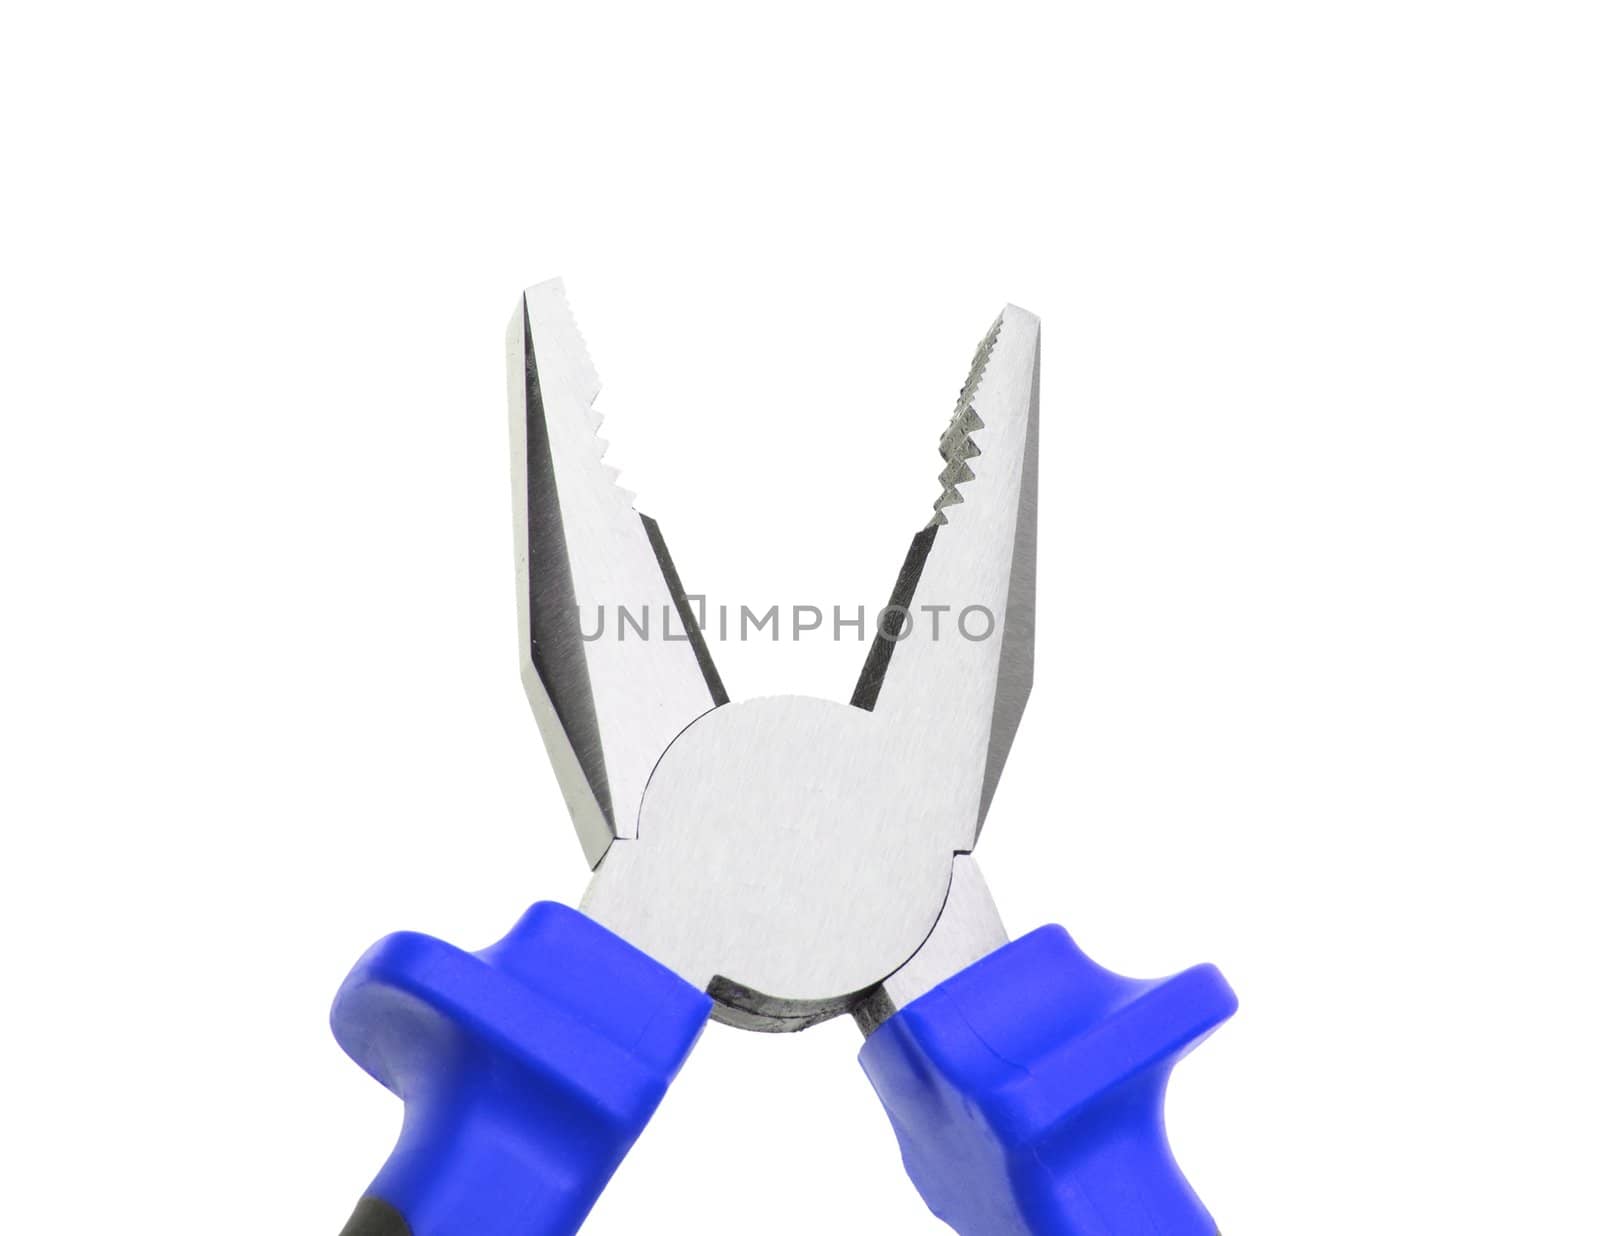 Part of red pliers. New condition. Close-up. Isolated on white background.